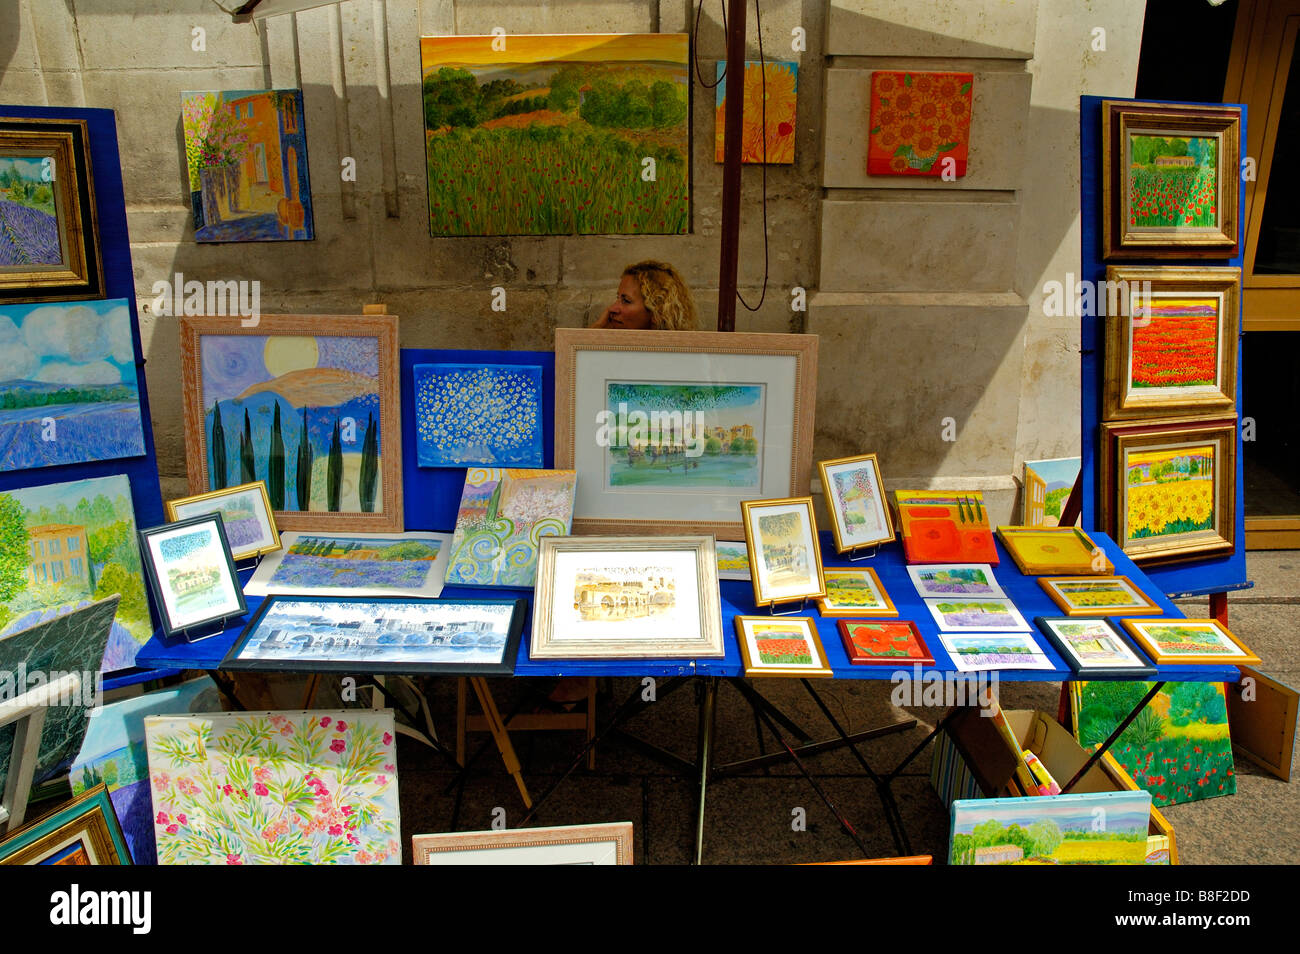 Paintings for sale on a market stall, Avignon, Provence, France. Stock Photo